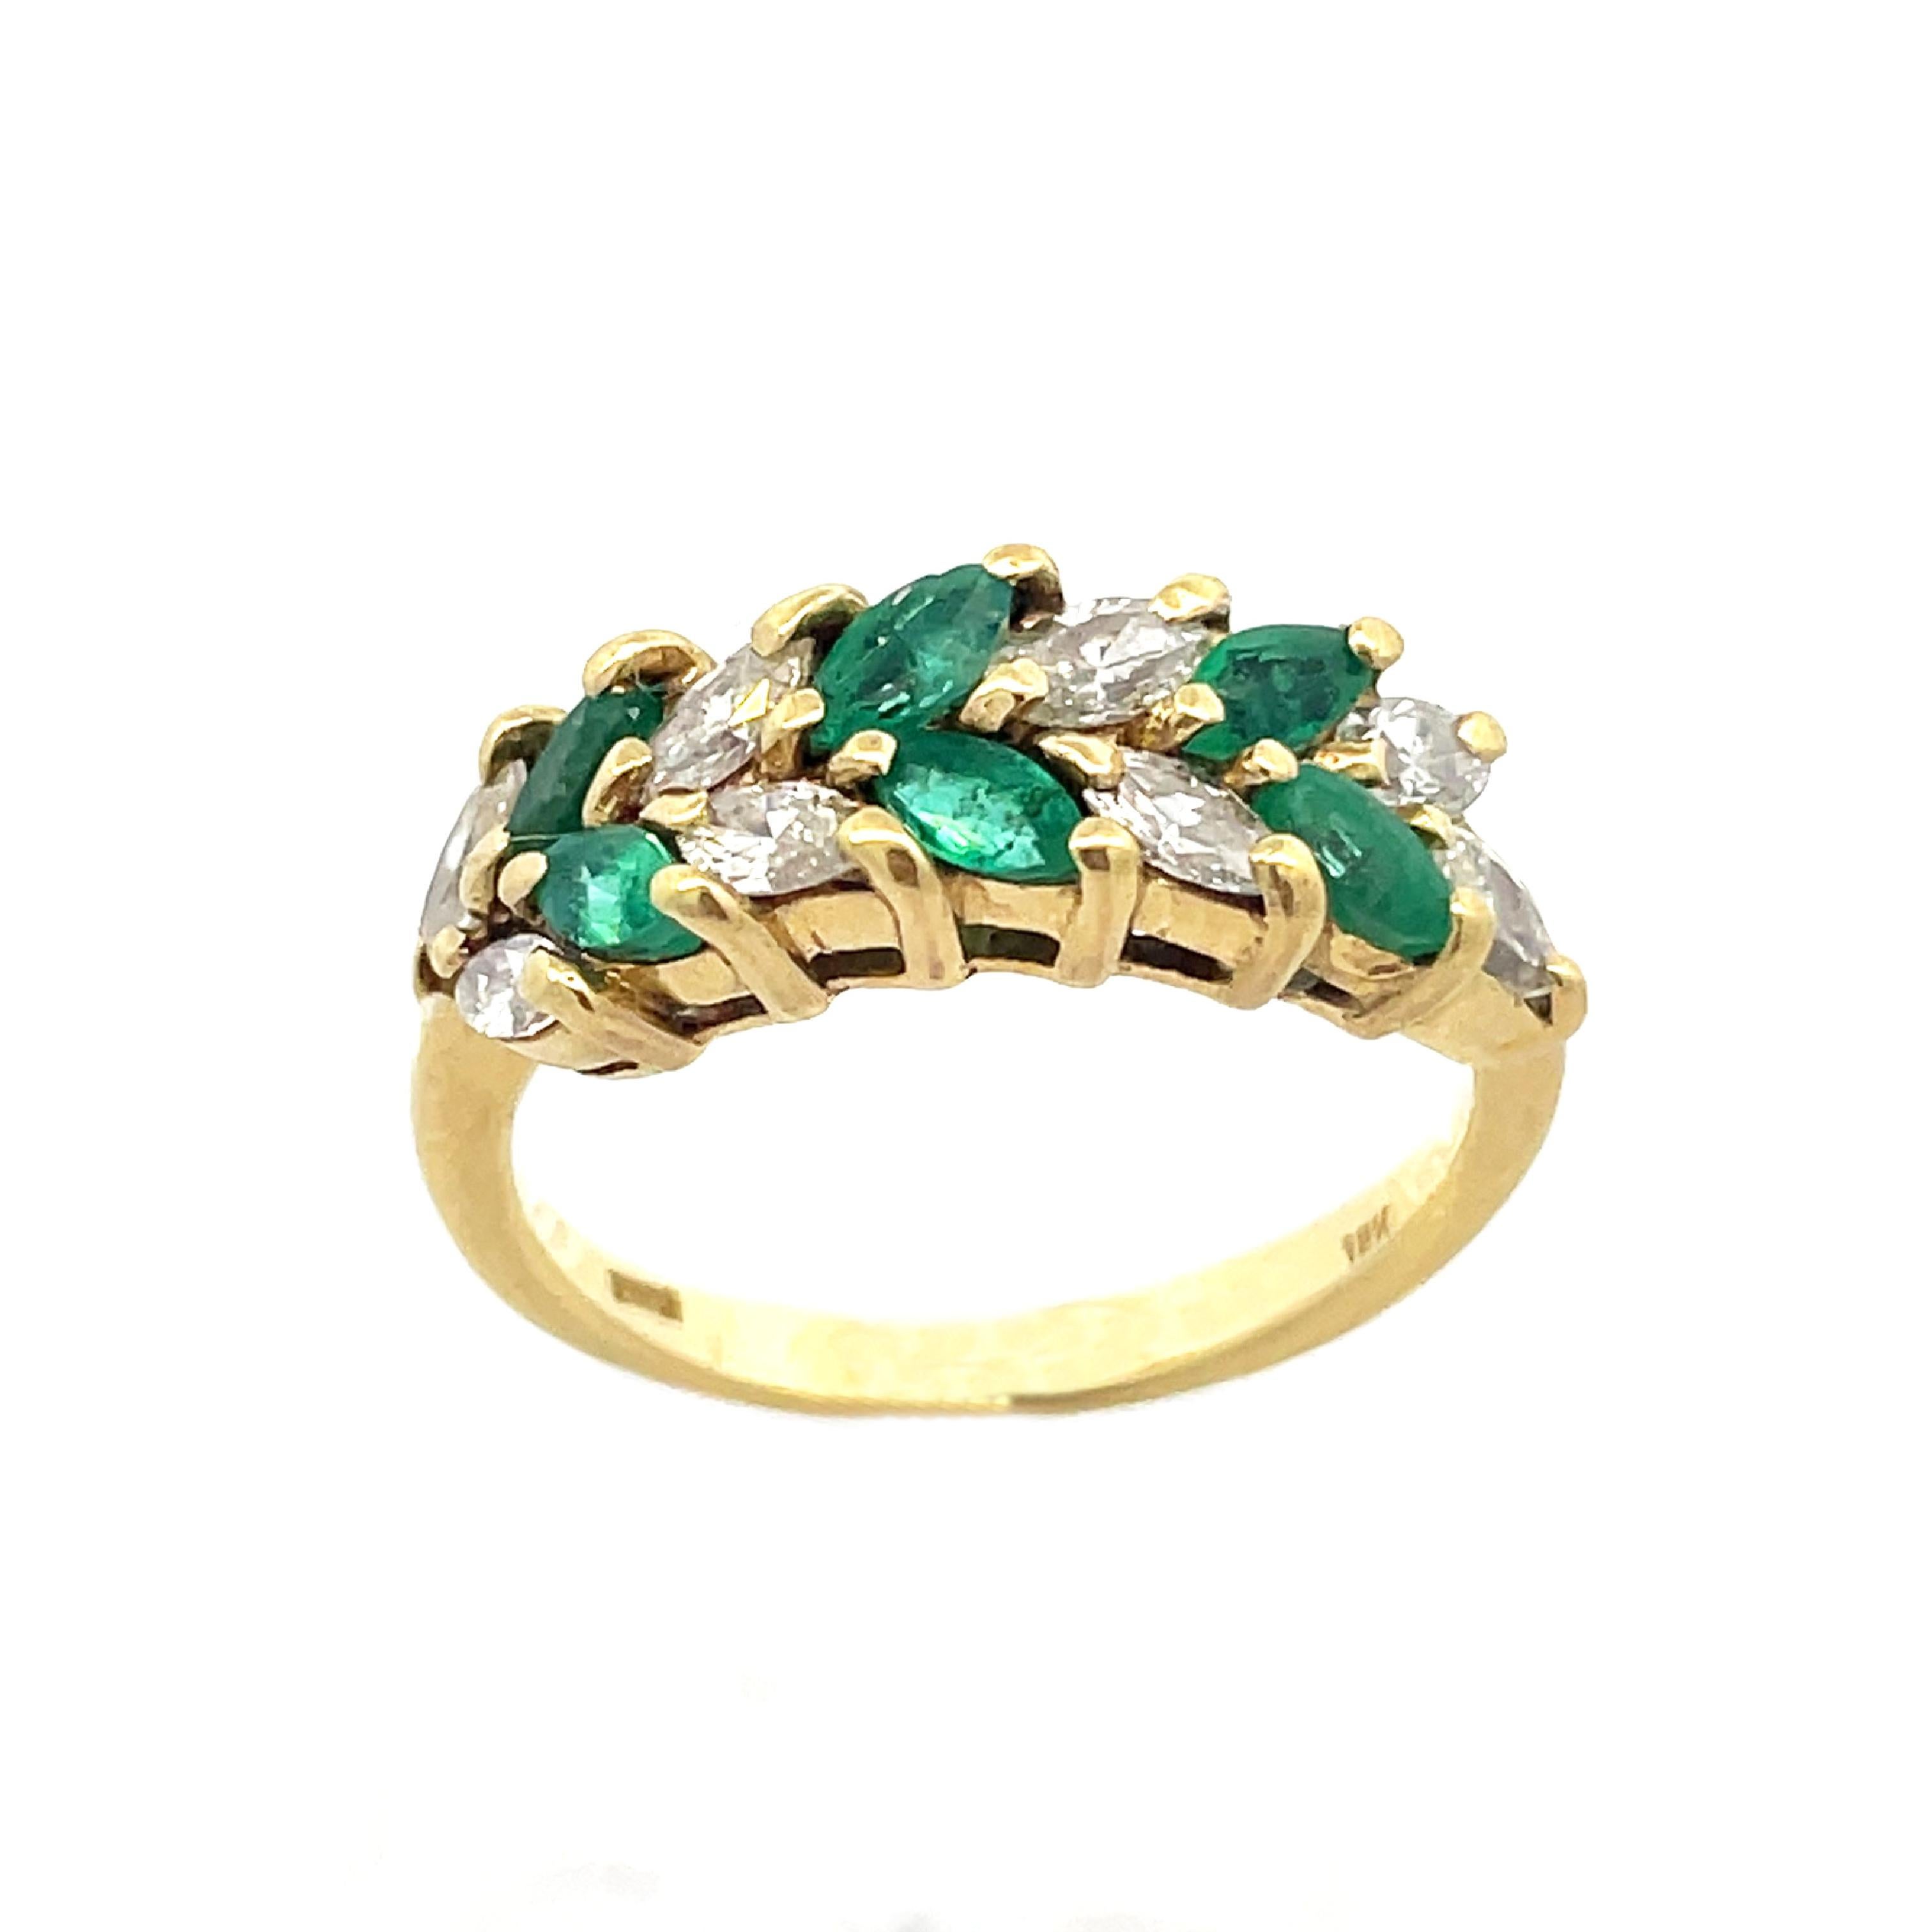 Contemporary 18K Yellow Gold Emerald and Diamond Ring